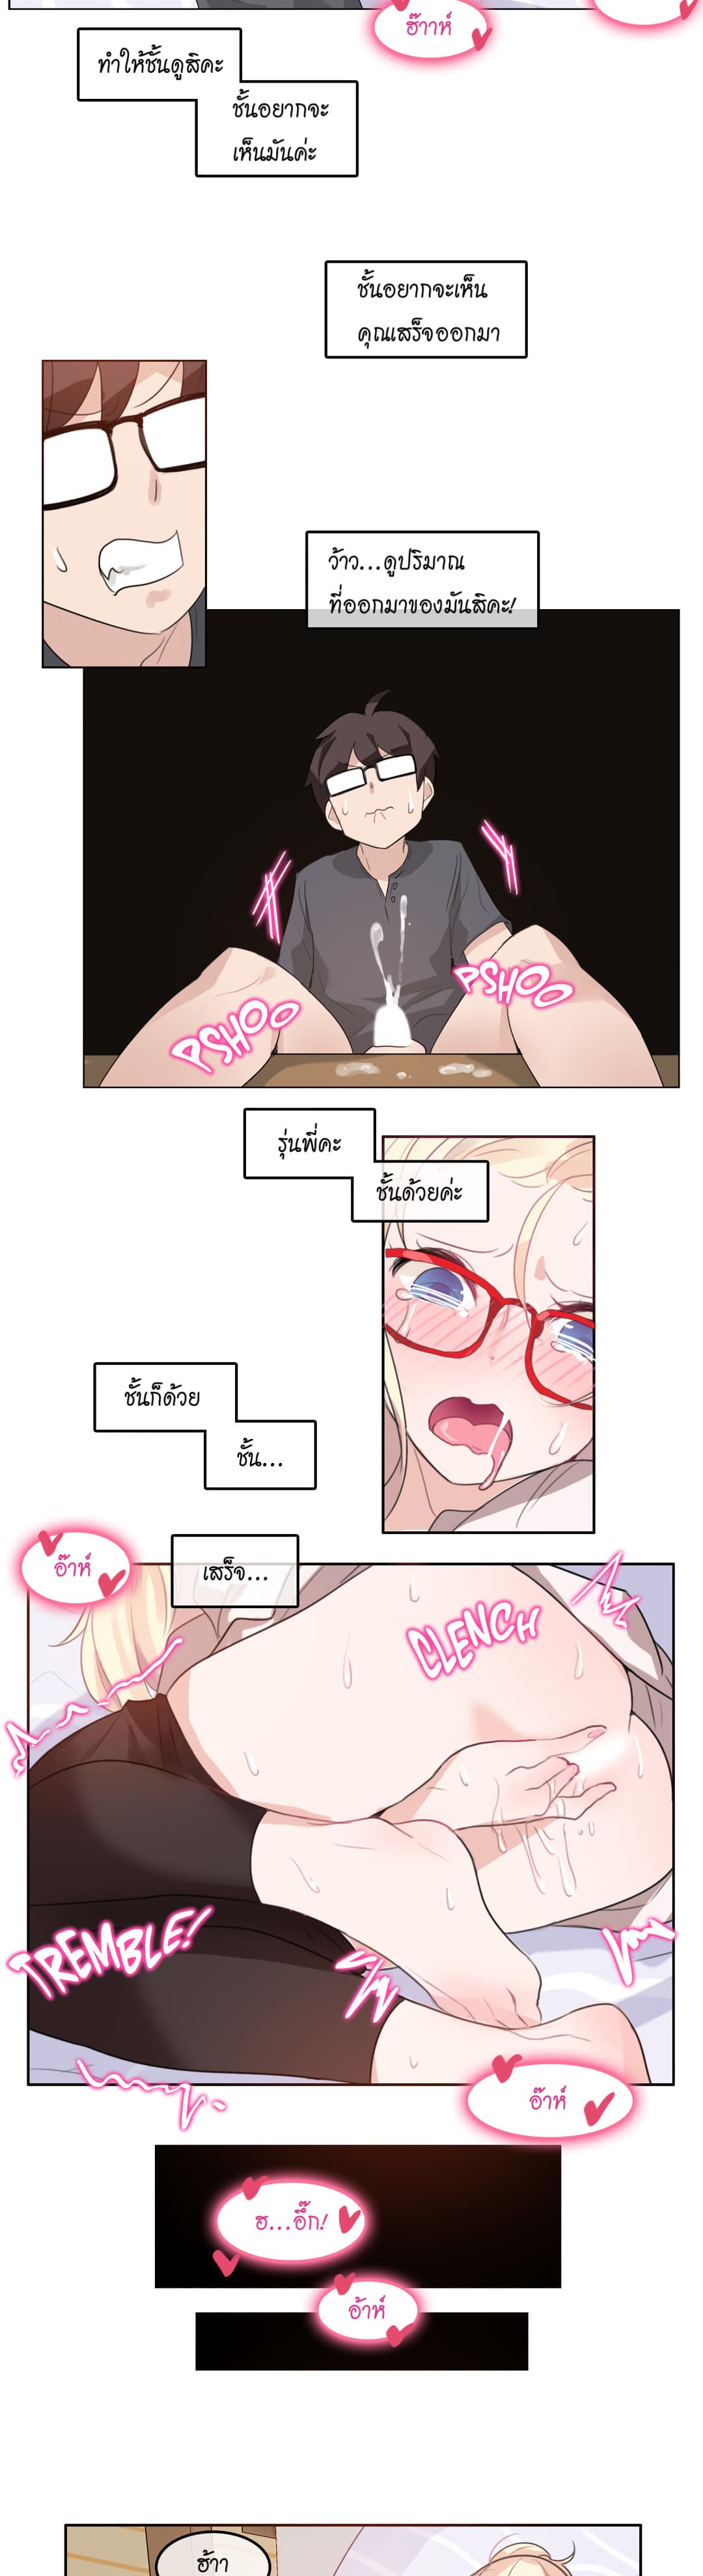 A Pervert’s Daily Life 8 (17)